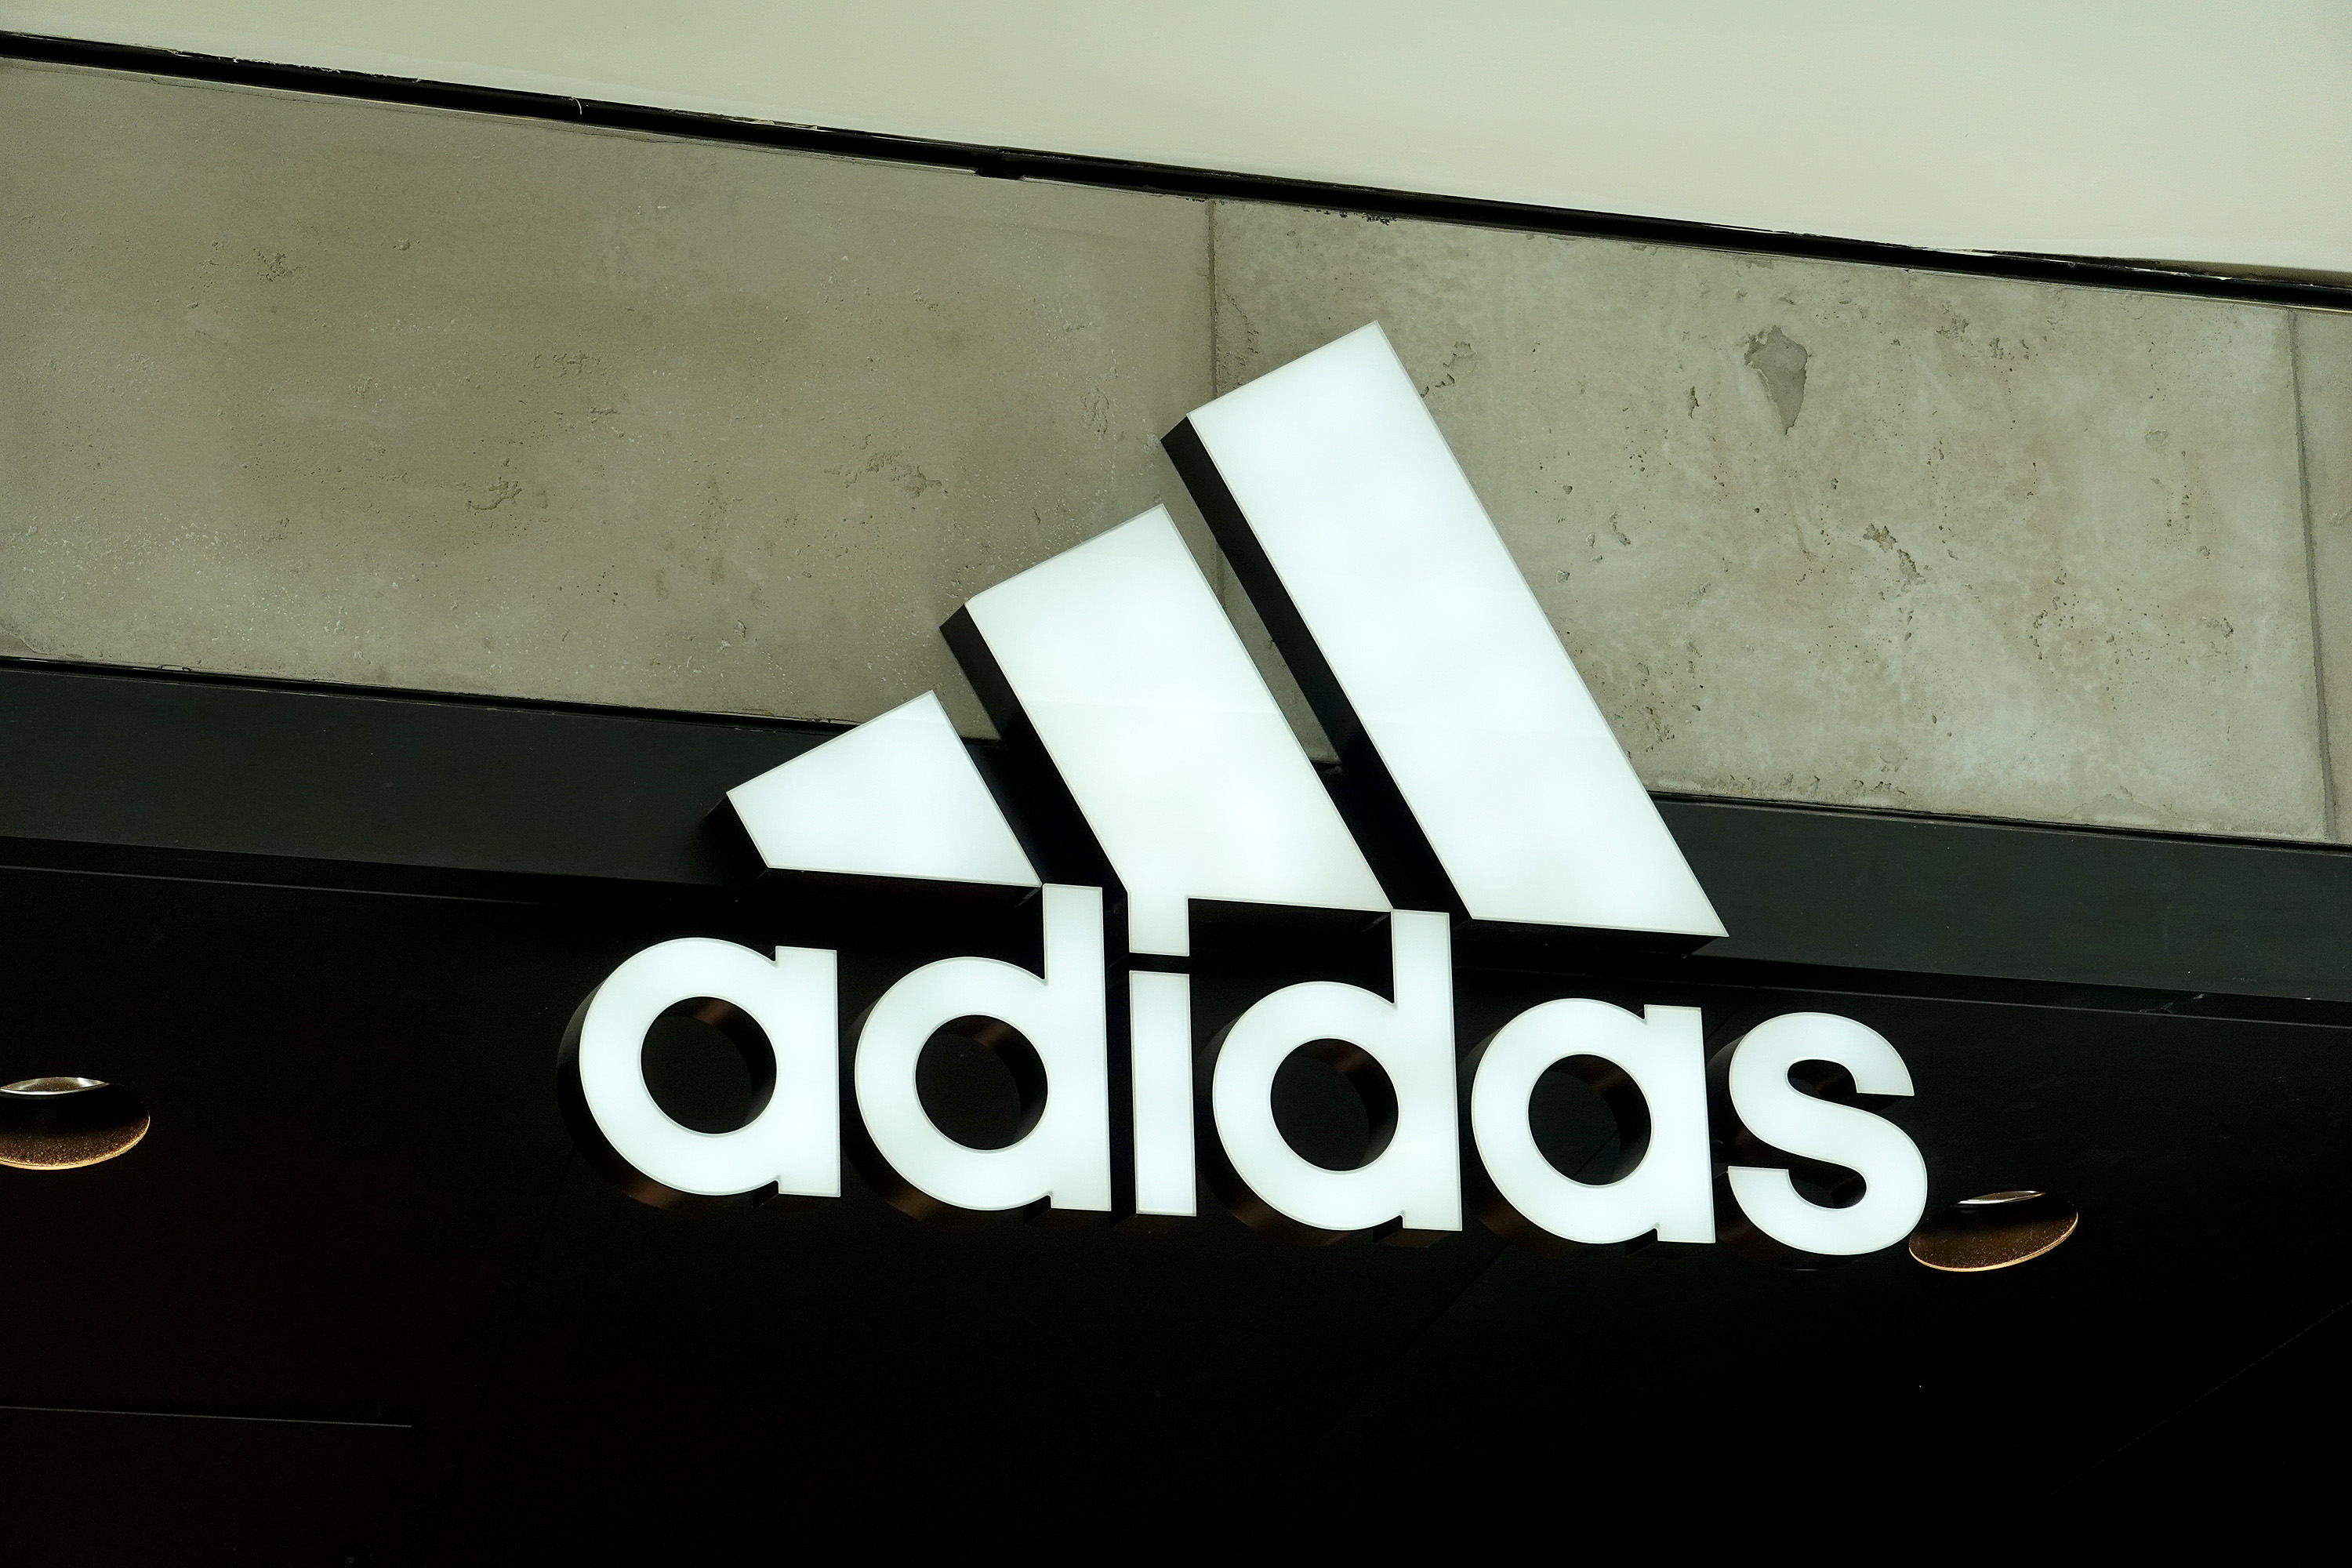 Adidas sports bra adverts banned over bare breasts : r/offbeat